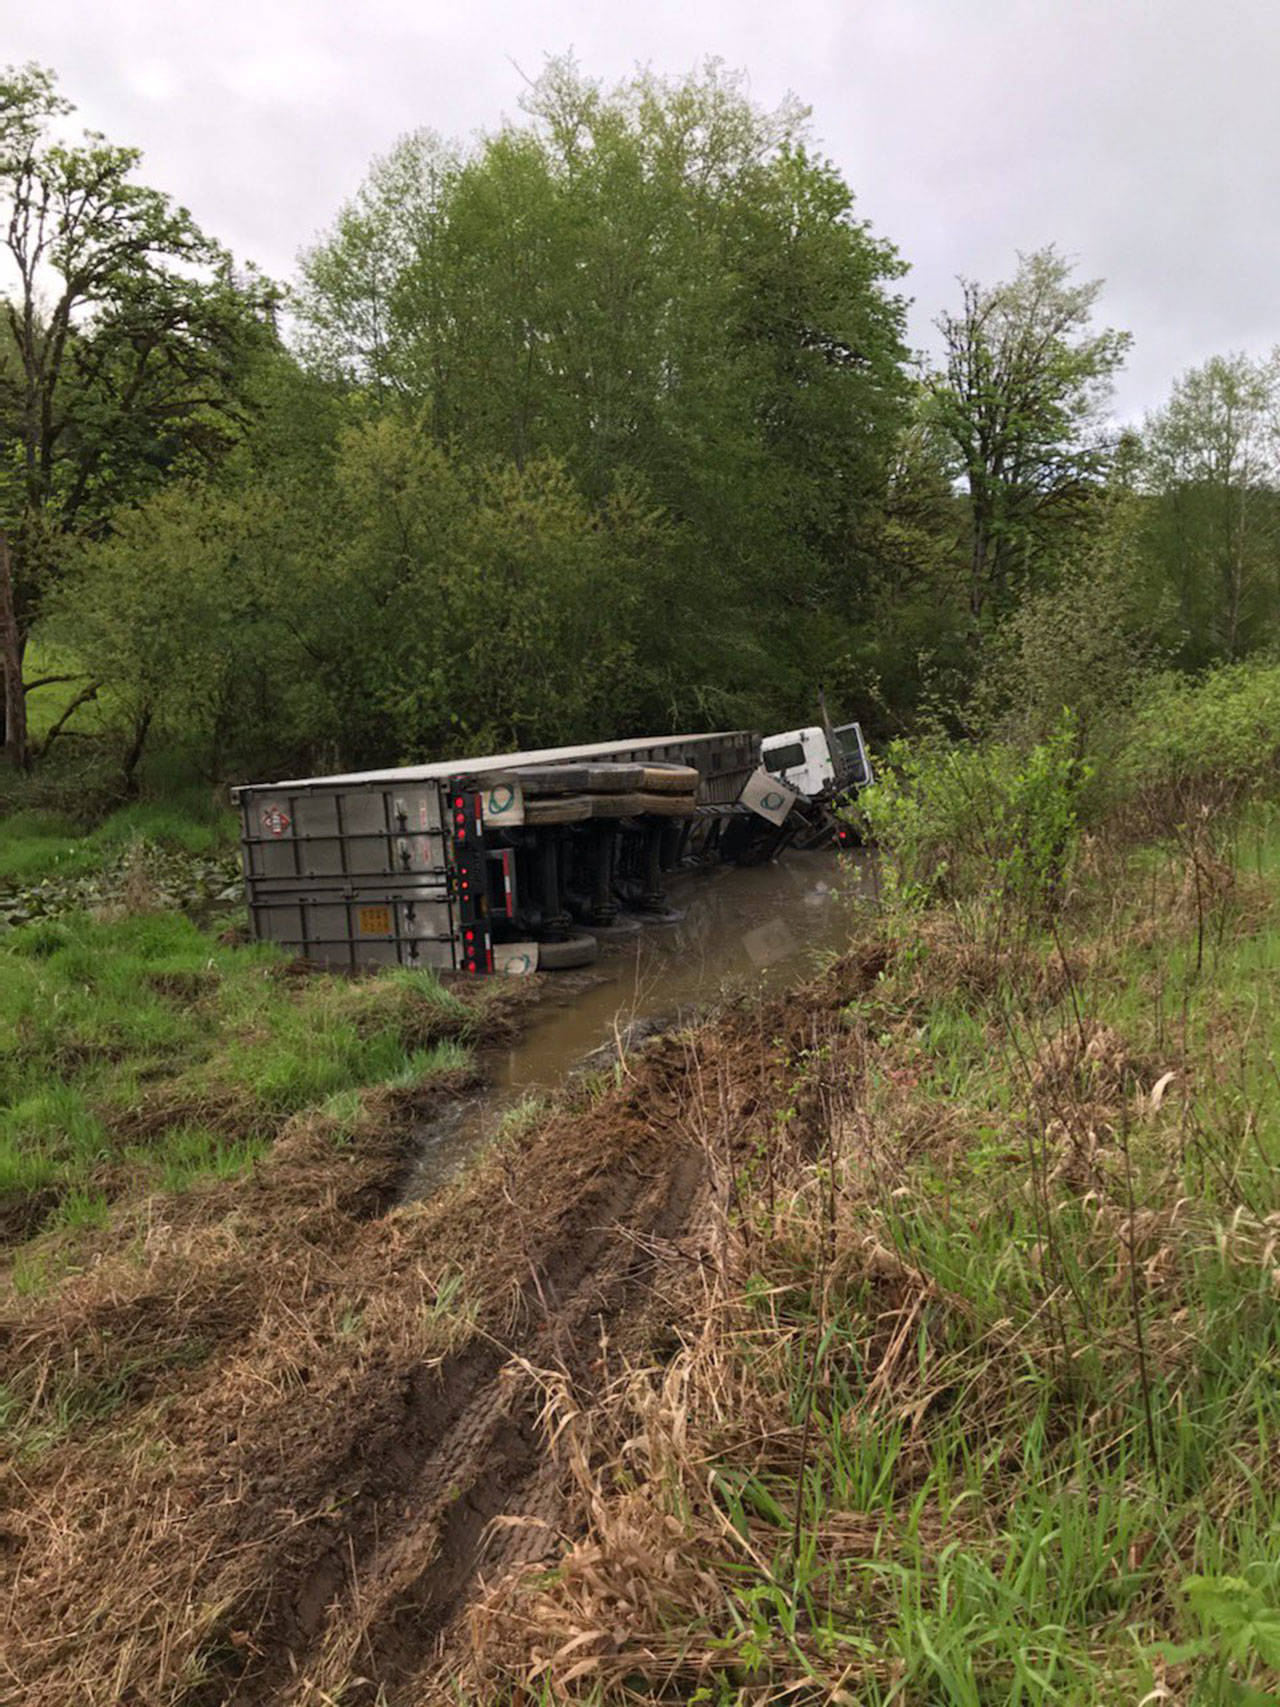 A semi carrying propane tanks flipped over at Leland Cutoff Road in Quilcene at approximately 8 a.m. Wednesday, May 6, 2020. U.S. Highway 101 is fully blocked from the state Highway 104 interchange to Center Road and will be until the semi can be turned upright and towed. (Washington State Trooper Chelsea Hodgson)